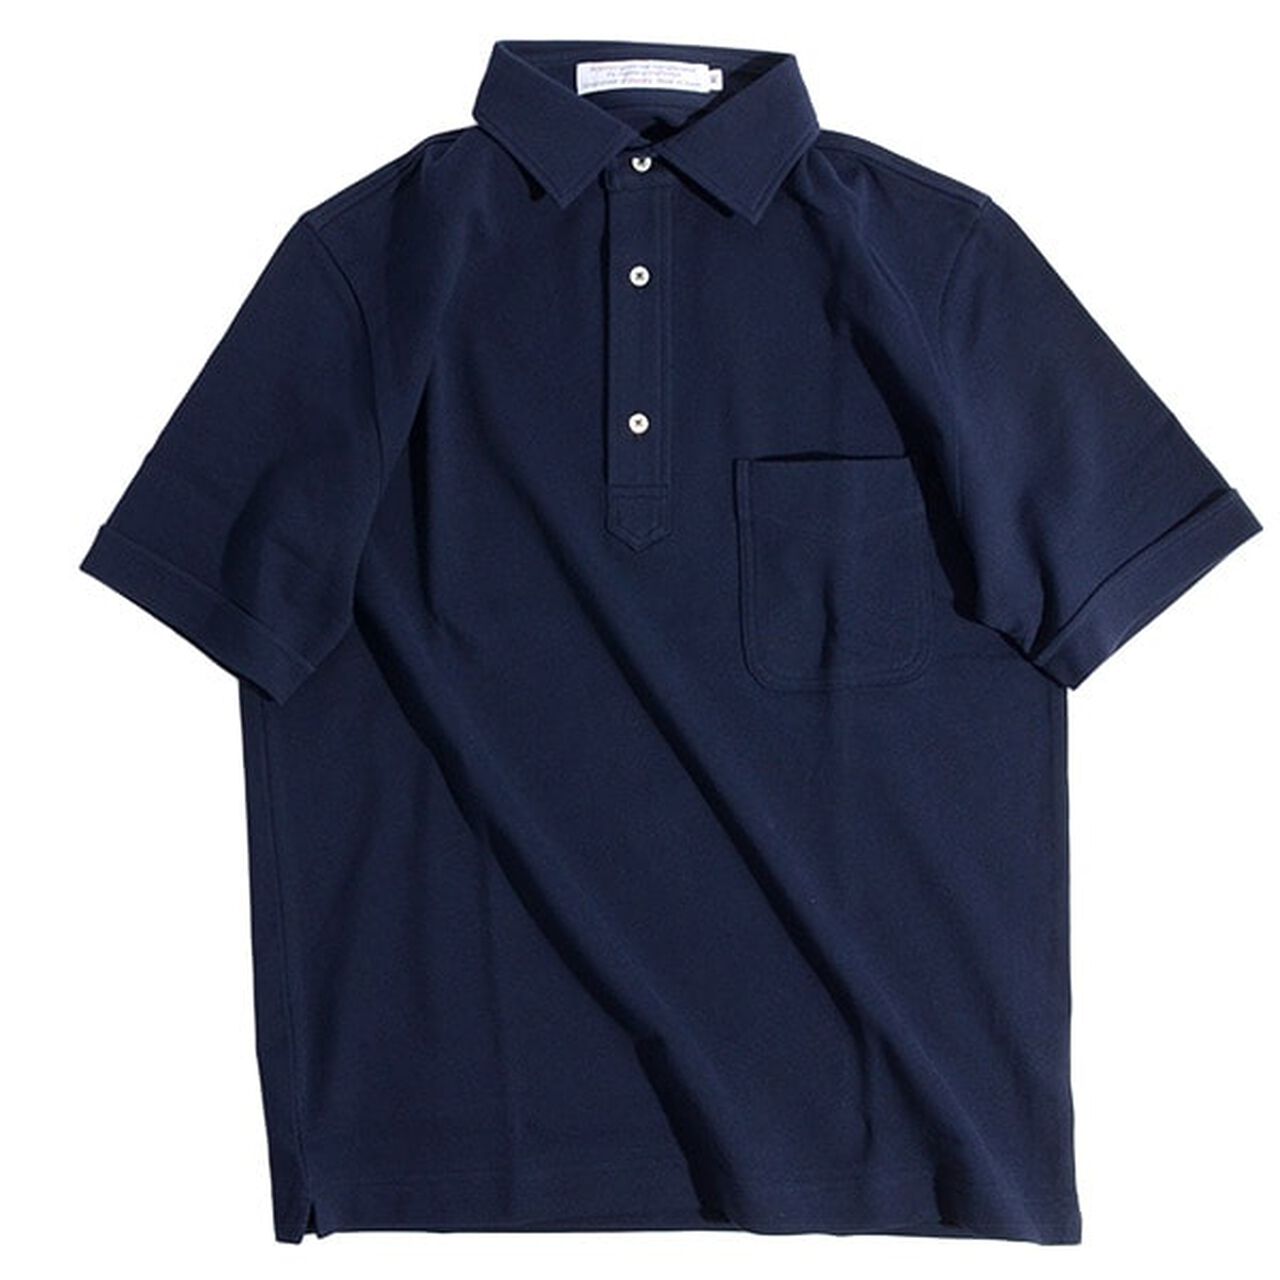 Premium Cotton Widespread Polo Shirt/Short Sleeves,Navy, large image number 0